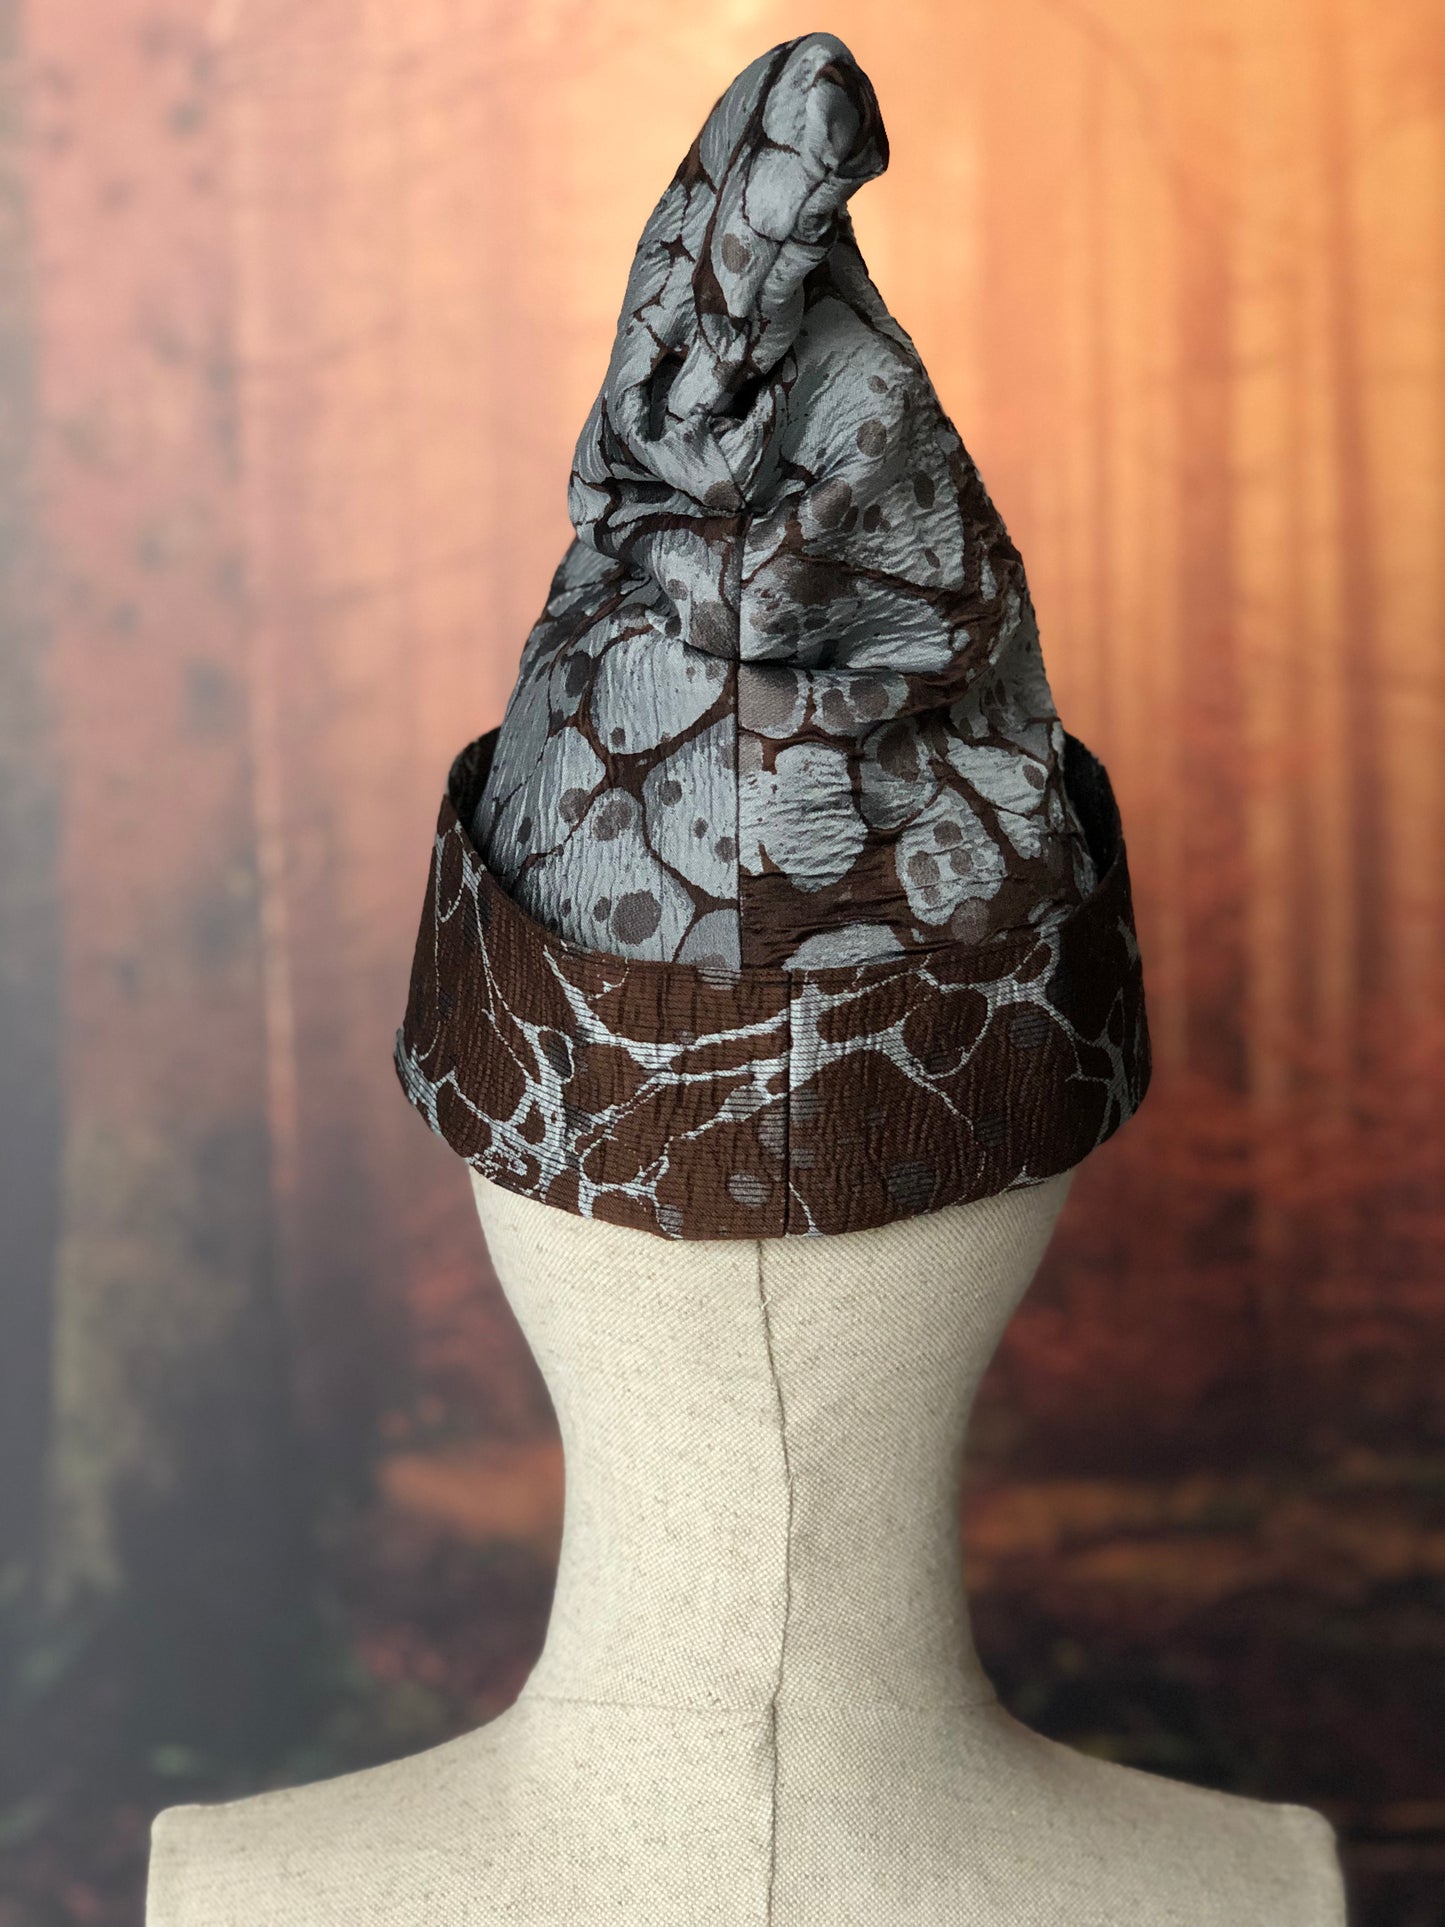 wizard / witch hat magical world in gold and brown tones